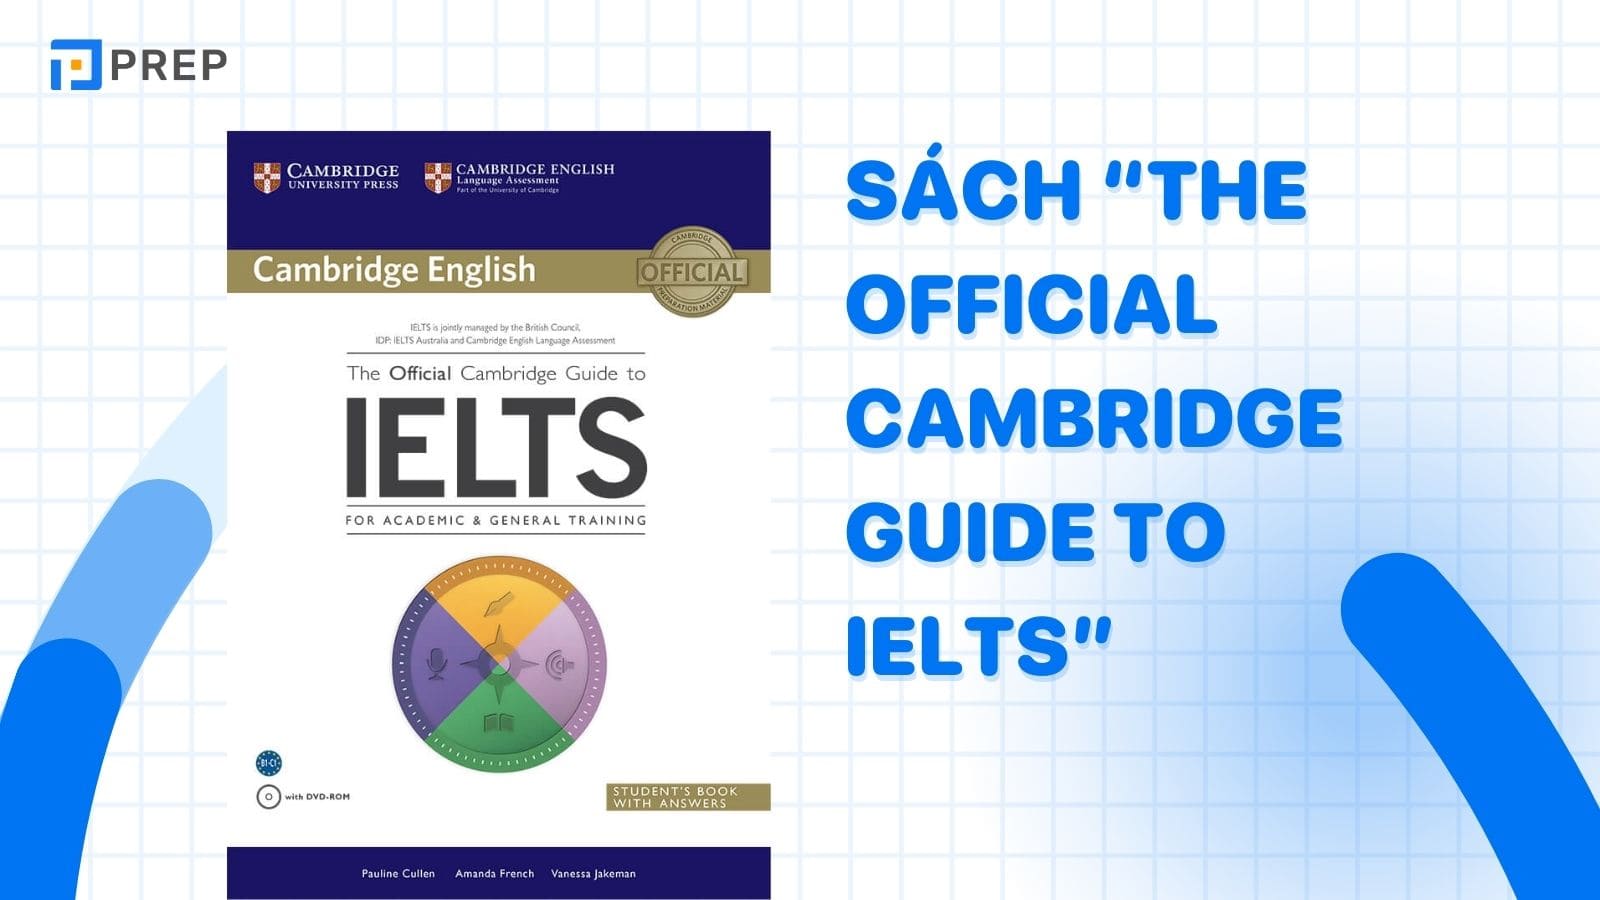 the-official-cambridge-guide-to-ielts.jpg